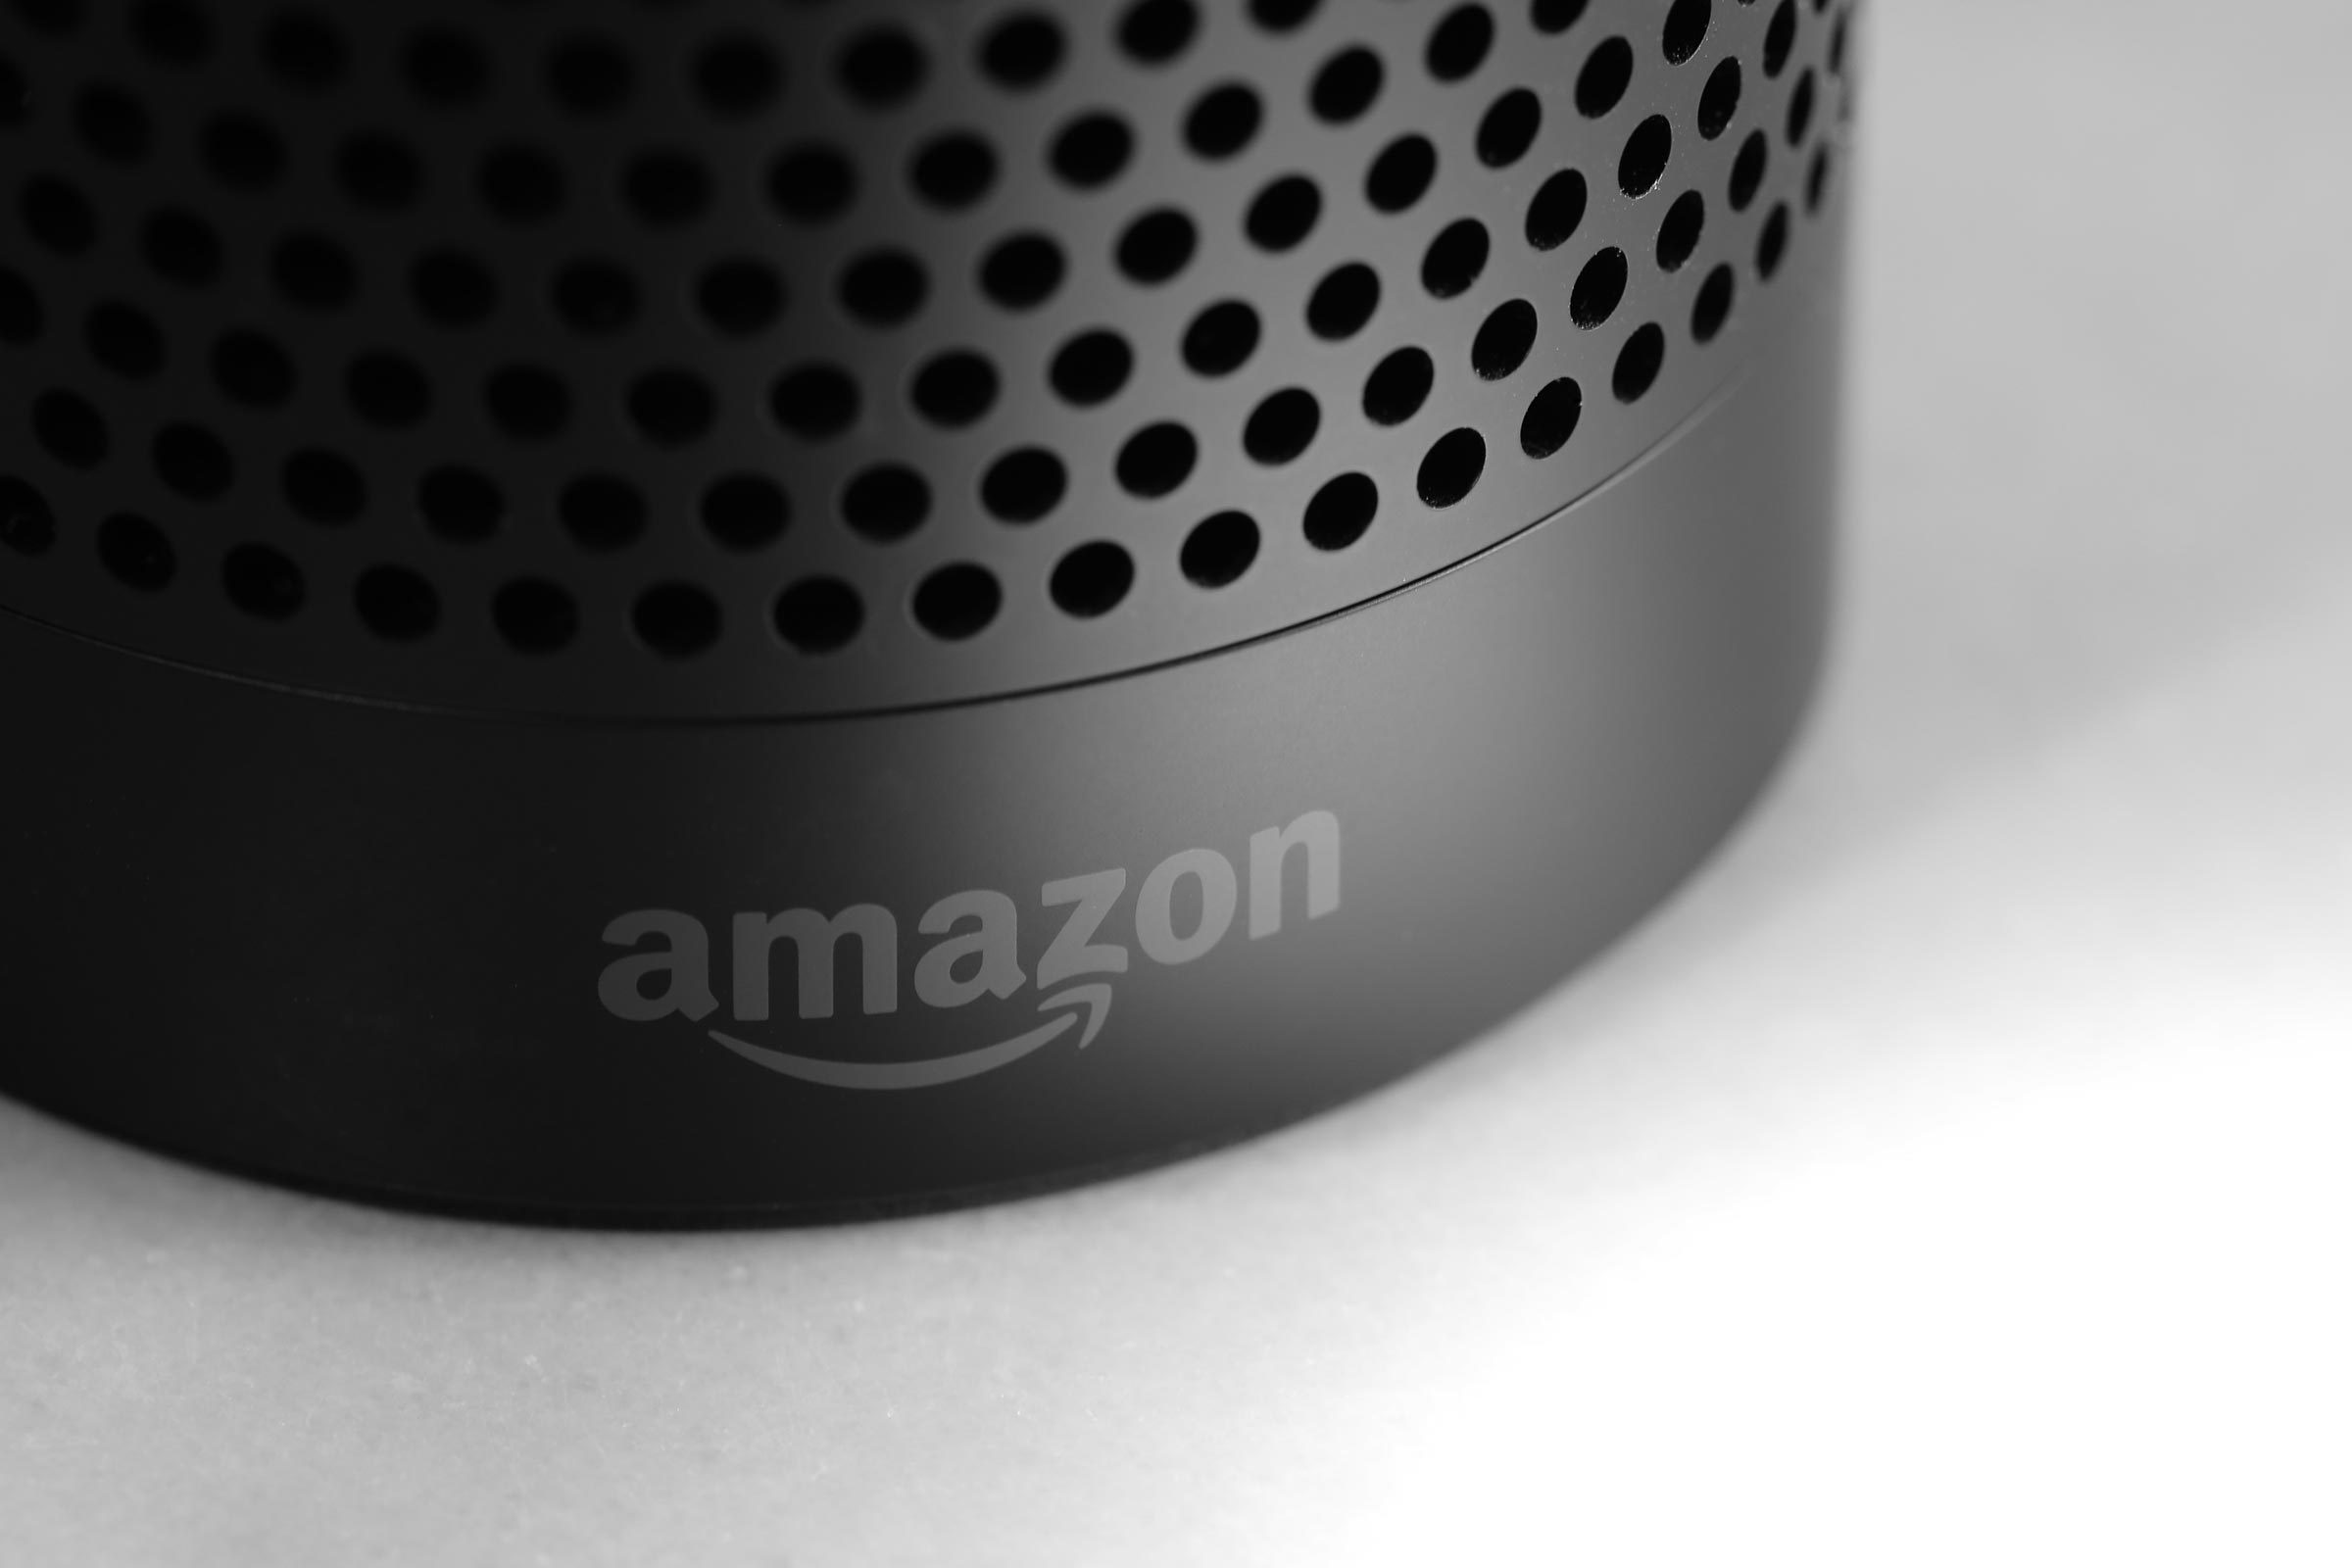 s Alexa can now sense the presence of people. Here's how to